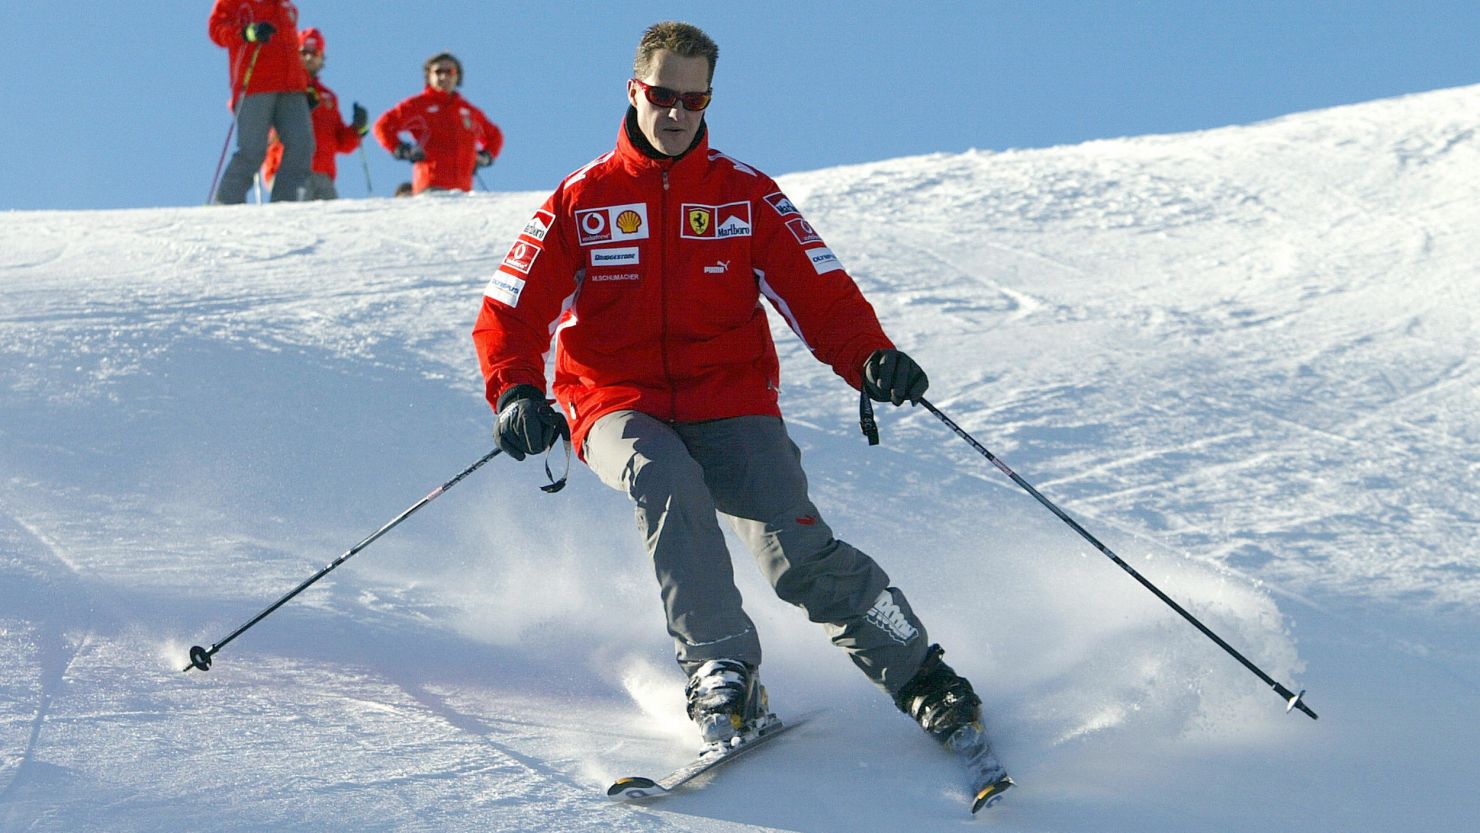 Michael Schumacher is an accomplished skier but his accident on December 29 has left him in a medically-induced coma.